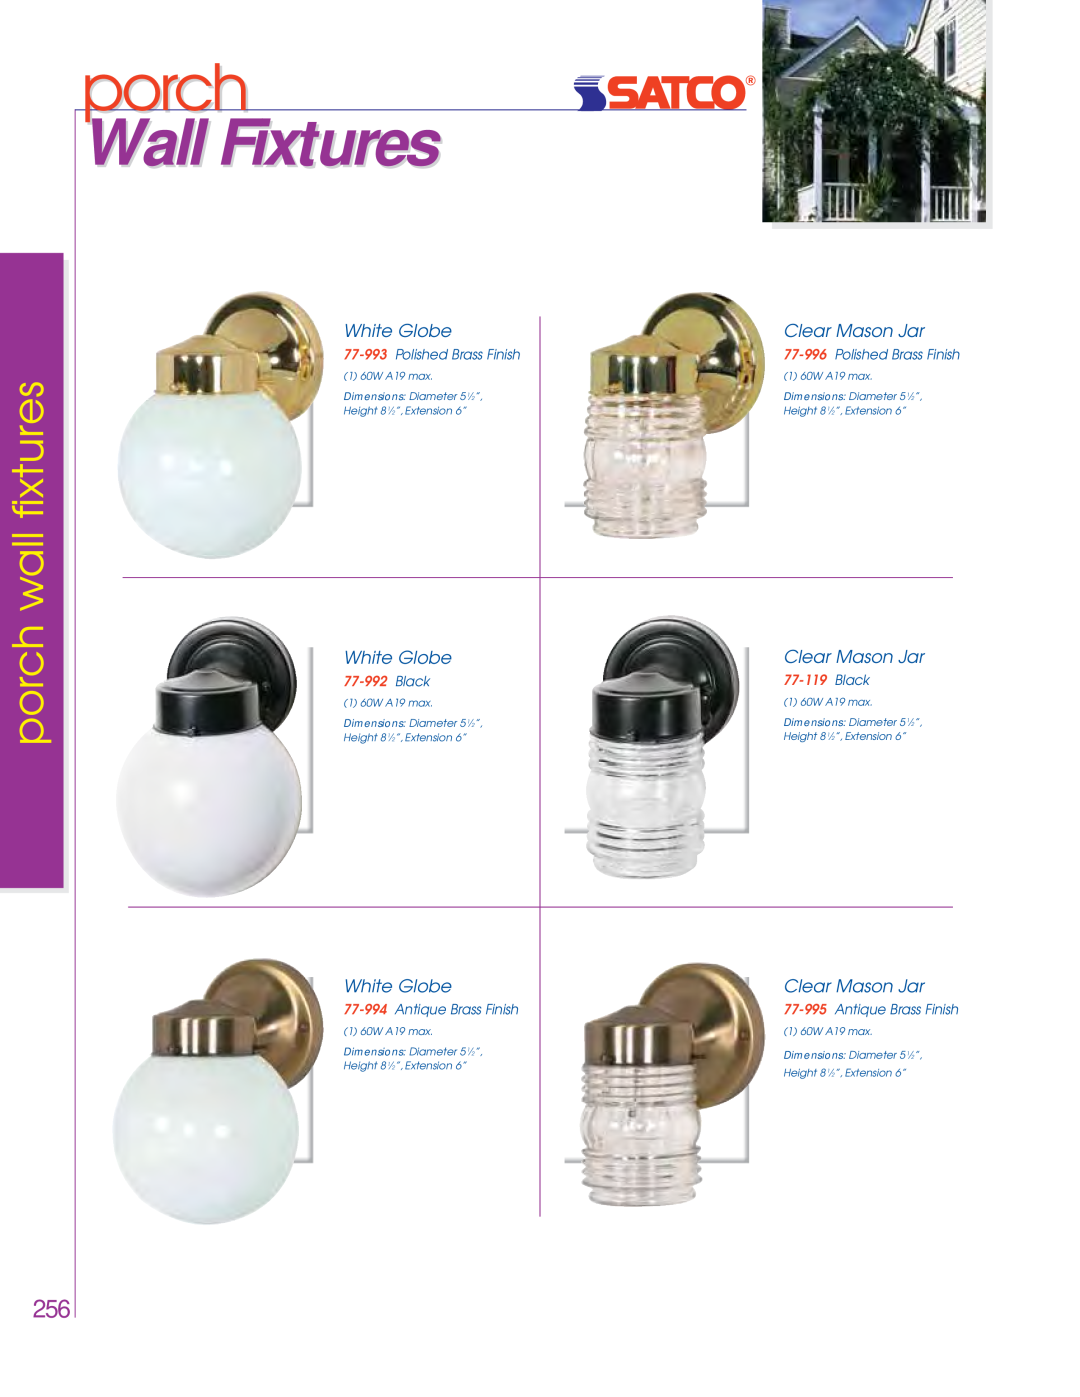 Satco Products 76-695, 76-693 porch, Wall Fixtures, wall fixtures, White Globe, Clear Mason Jar, Polished Brass Finish 